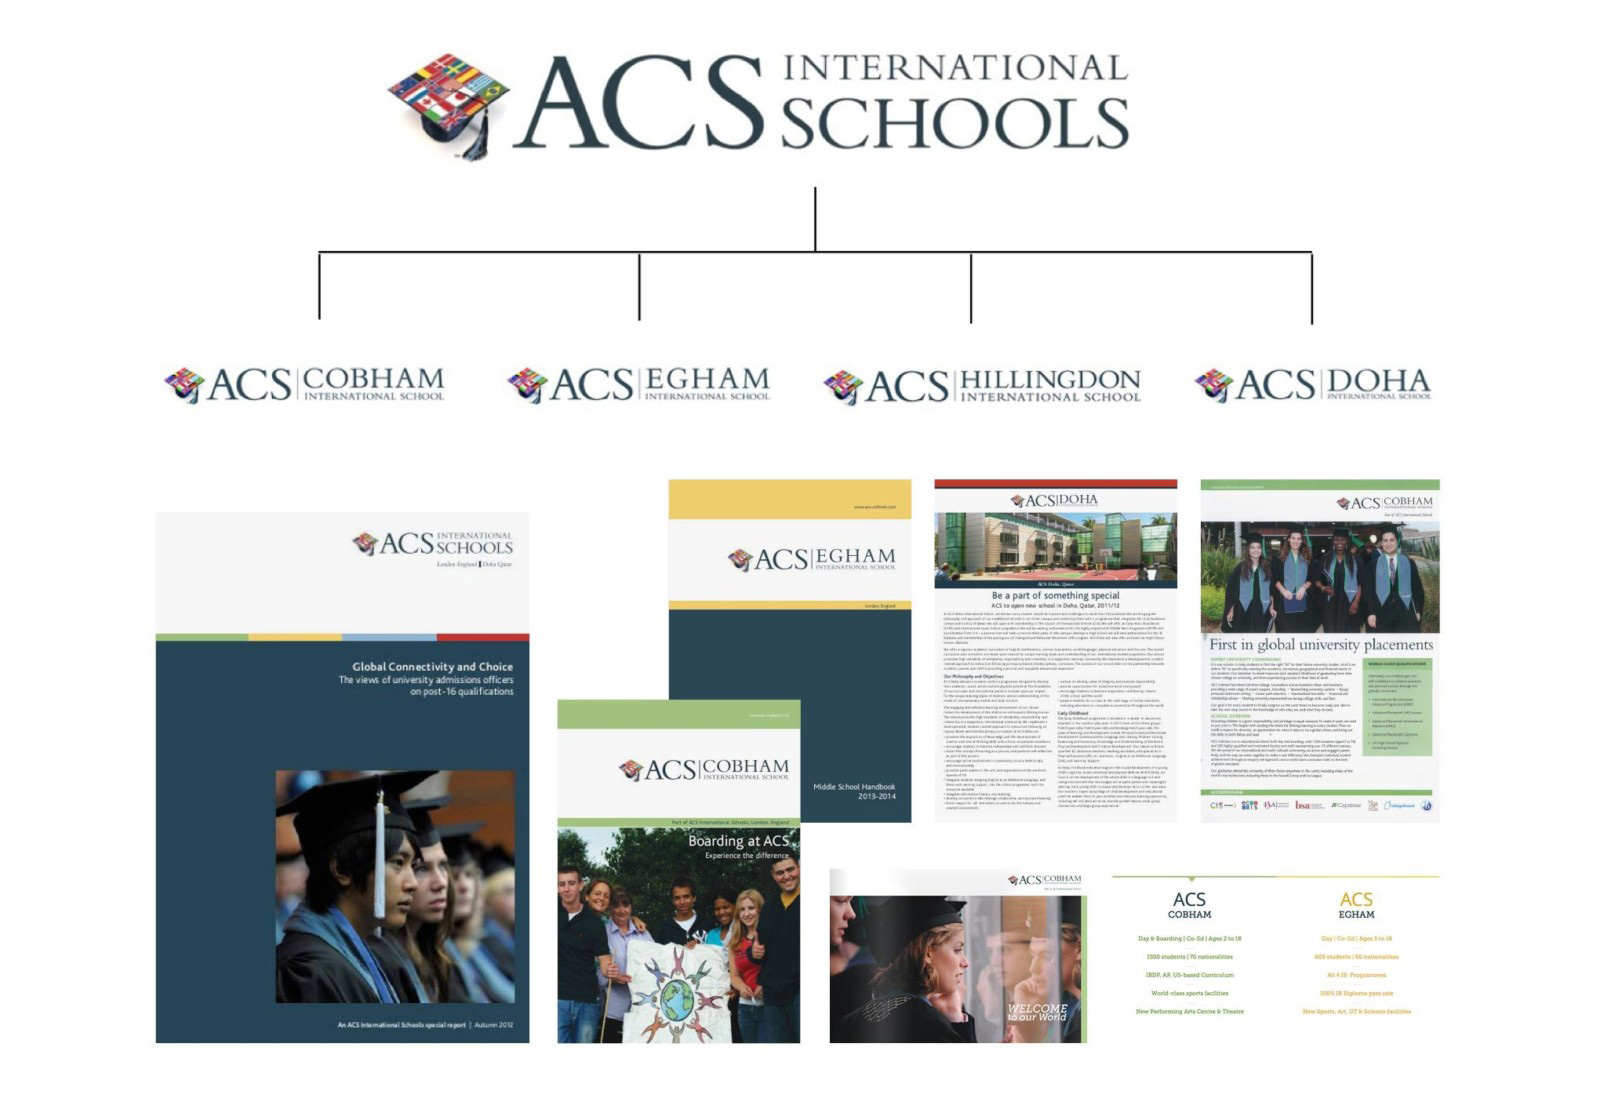 New Logo and Identity for ACS International Schools by Johnson Banks